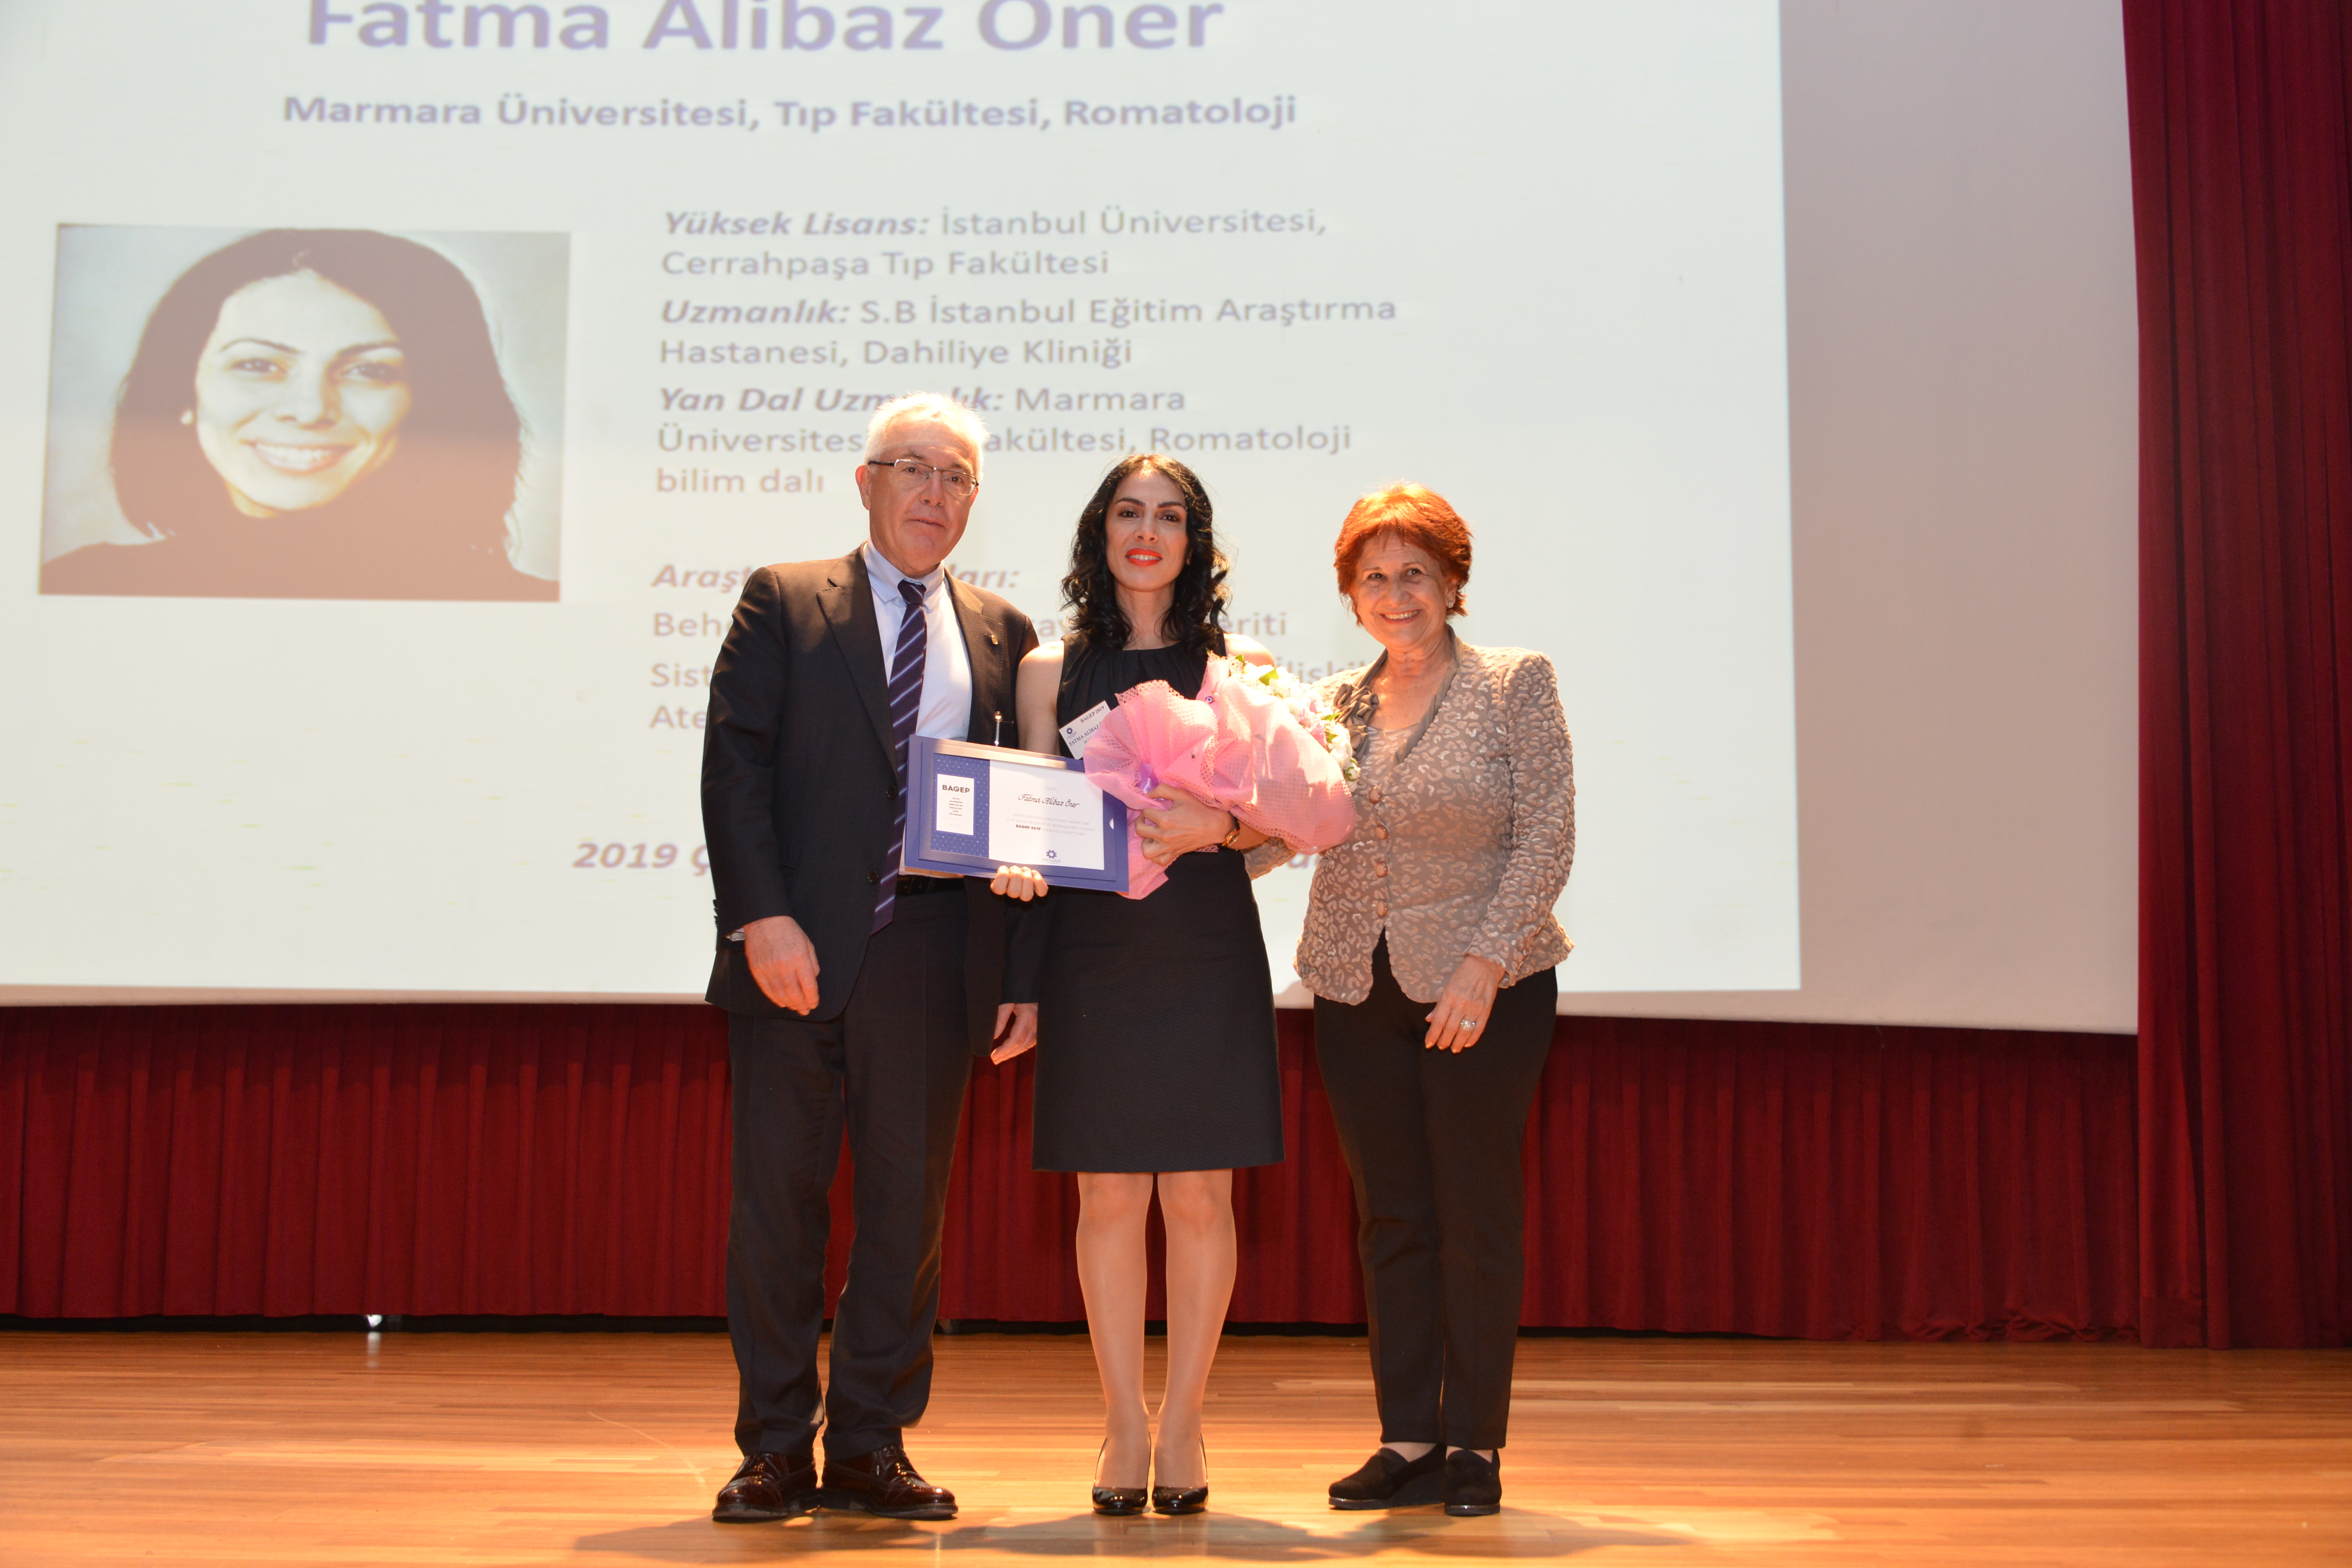 Exp. Dr. Fatma Alibaz Öner Receives Young Scientists Award from Science Academy in Medicine